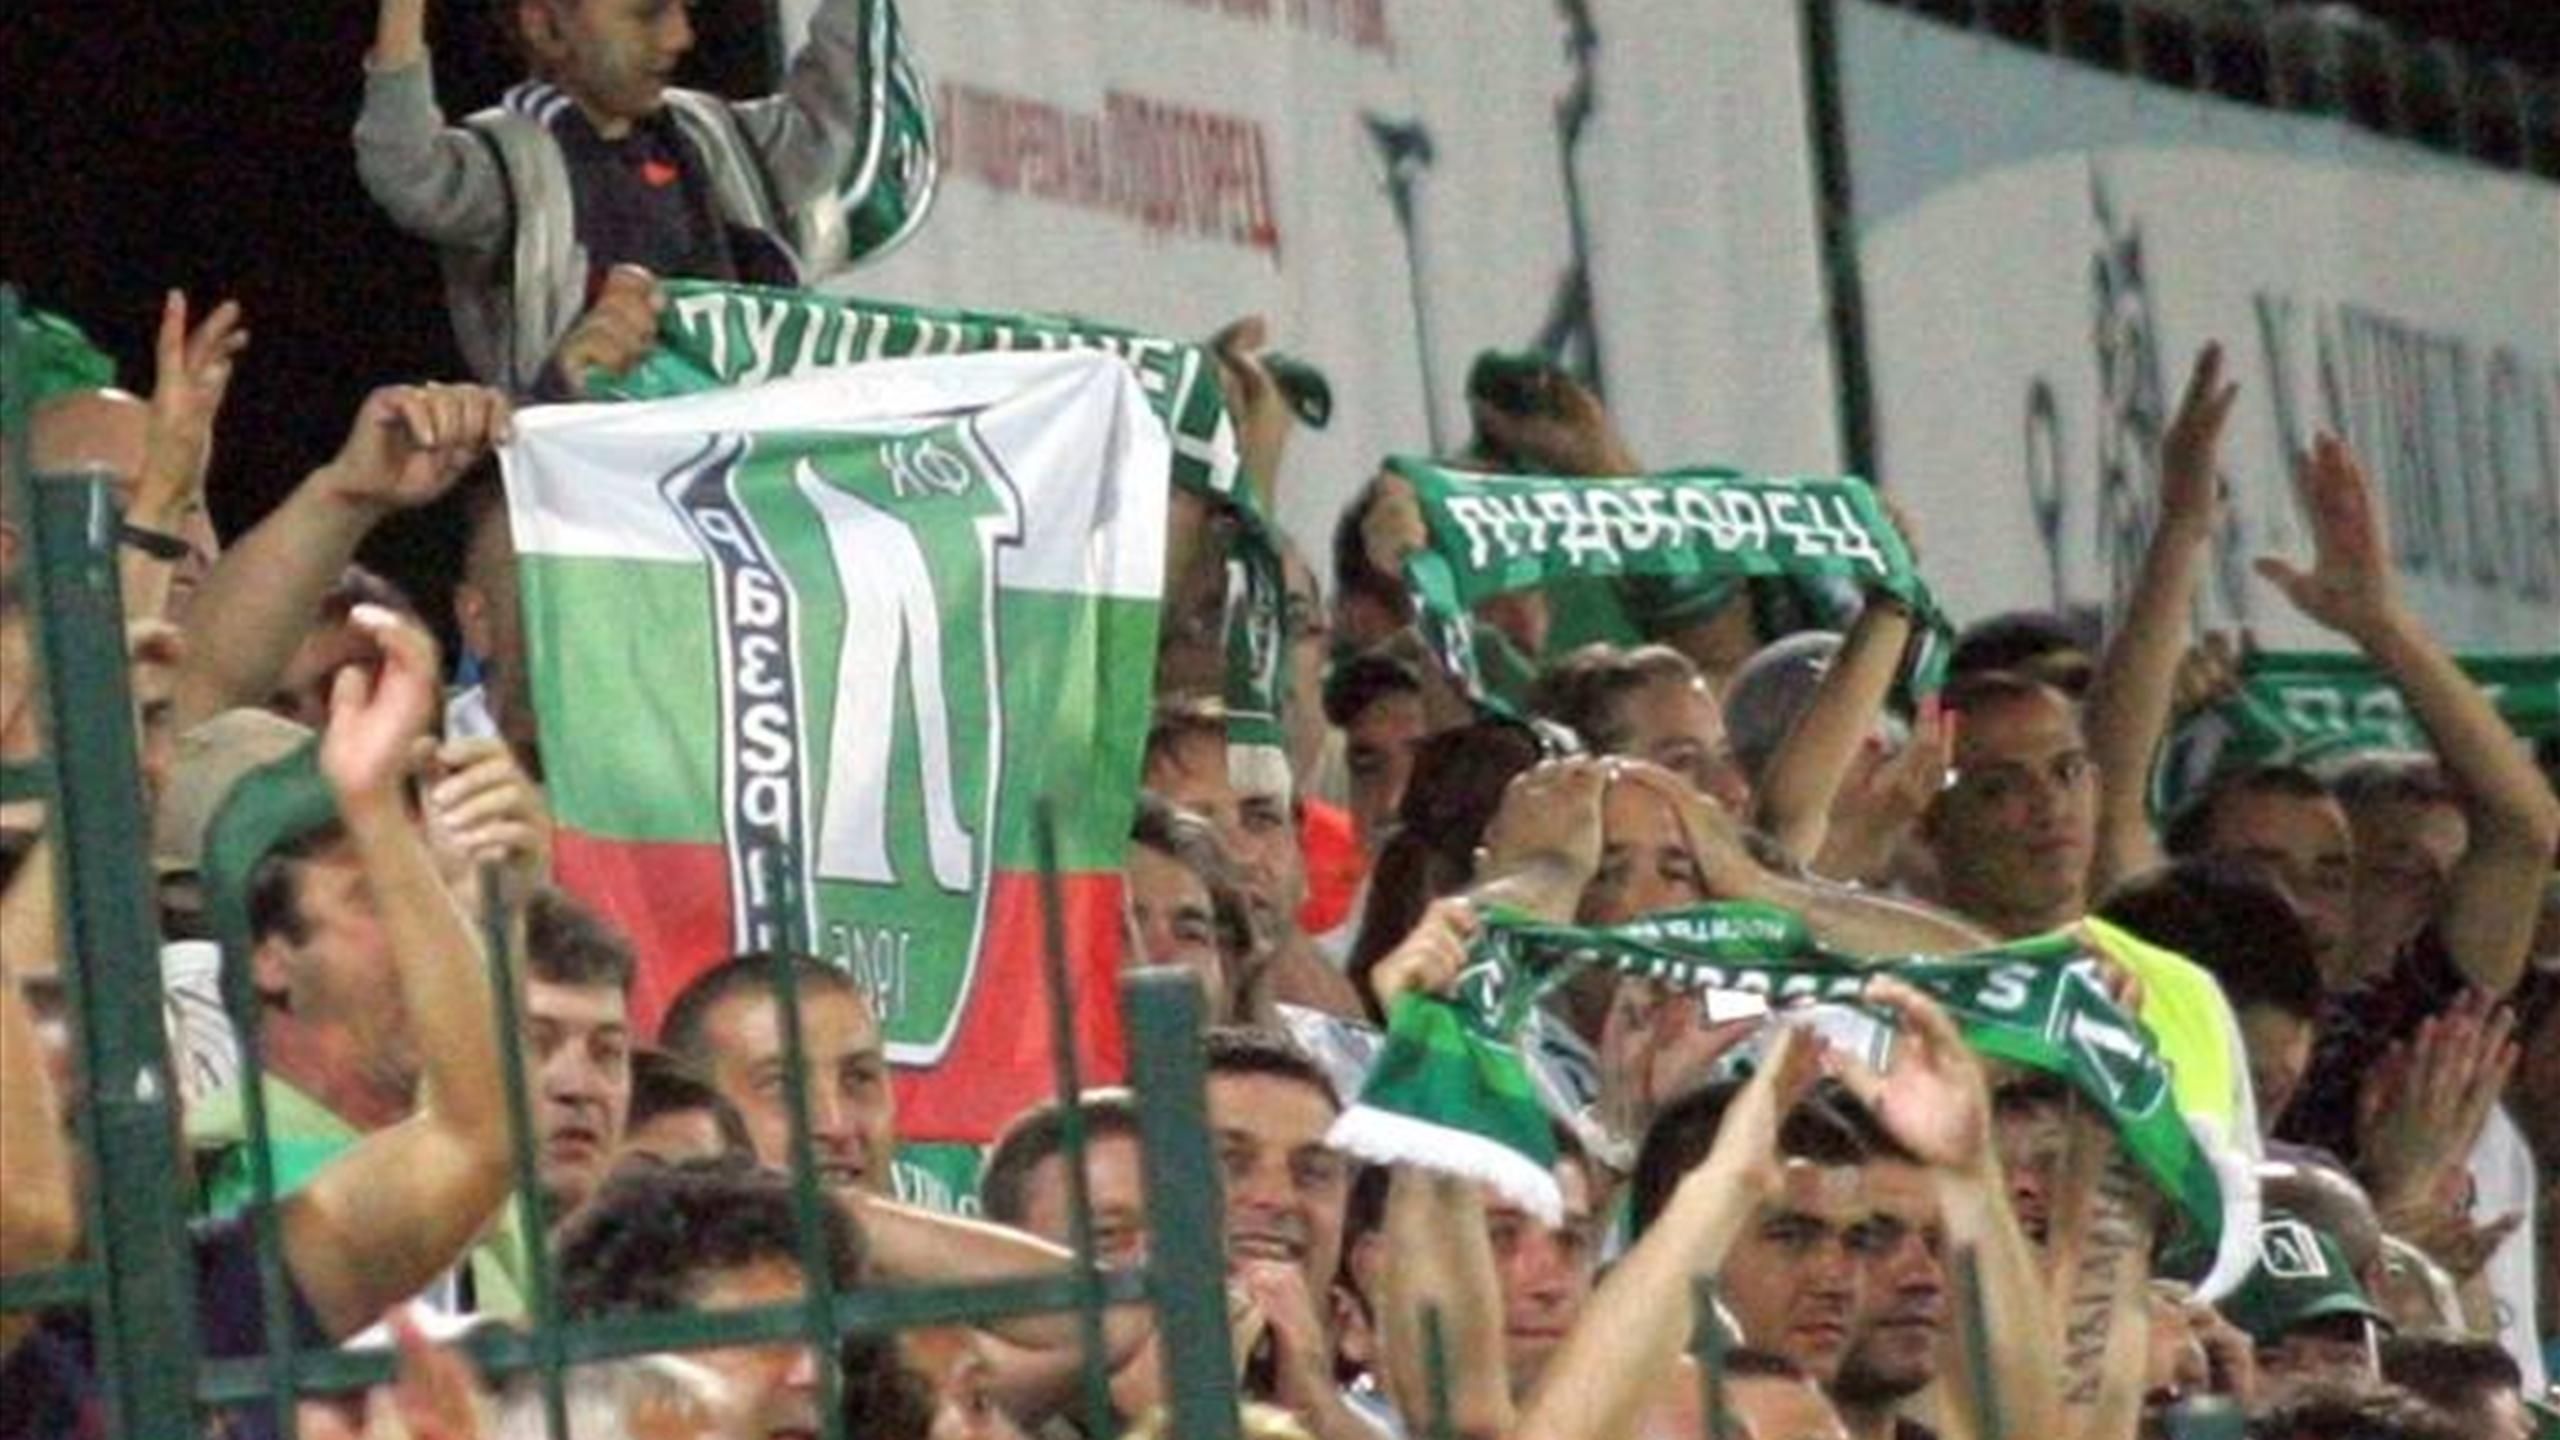 Ludogorets and Levski achieve victories in the European football